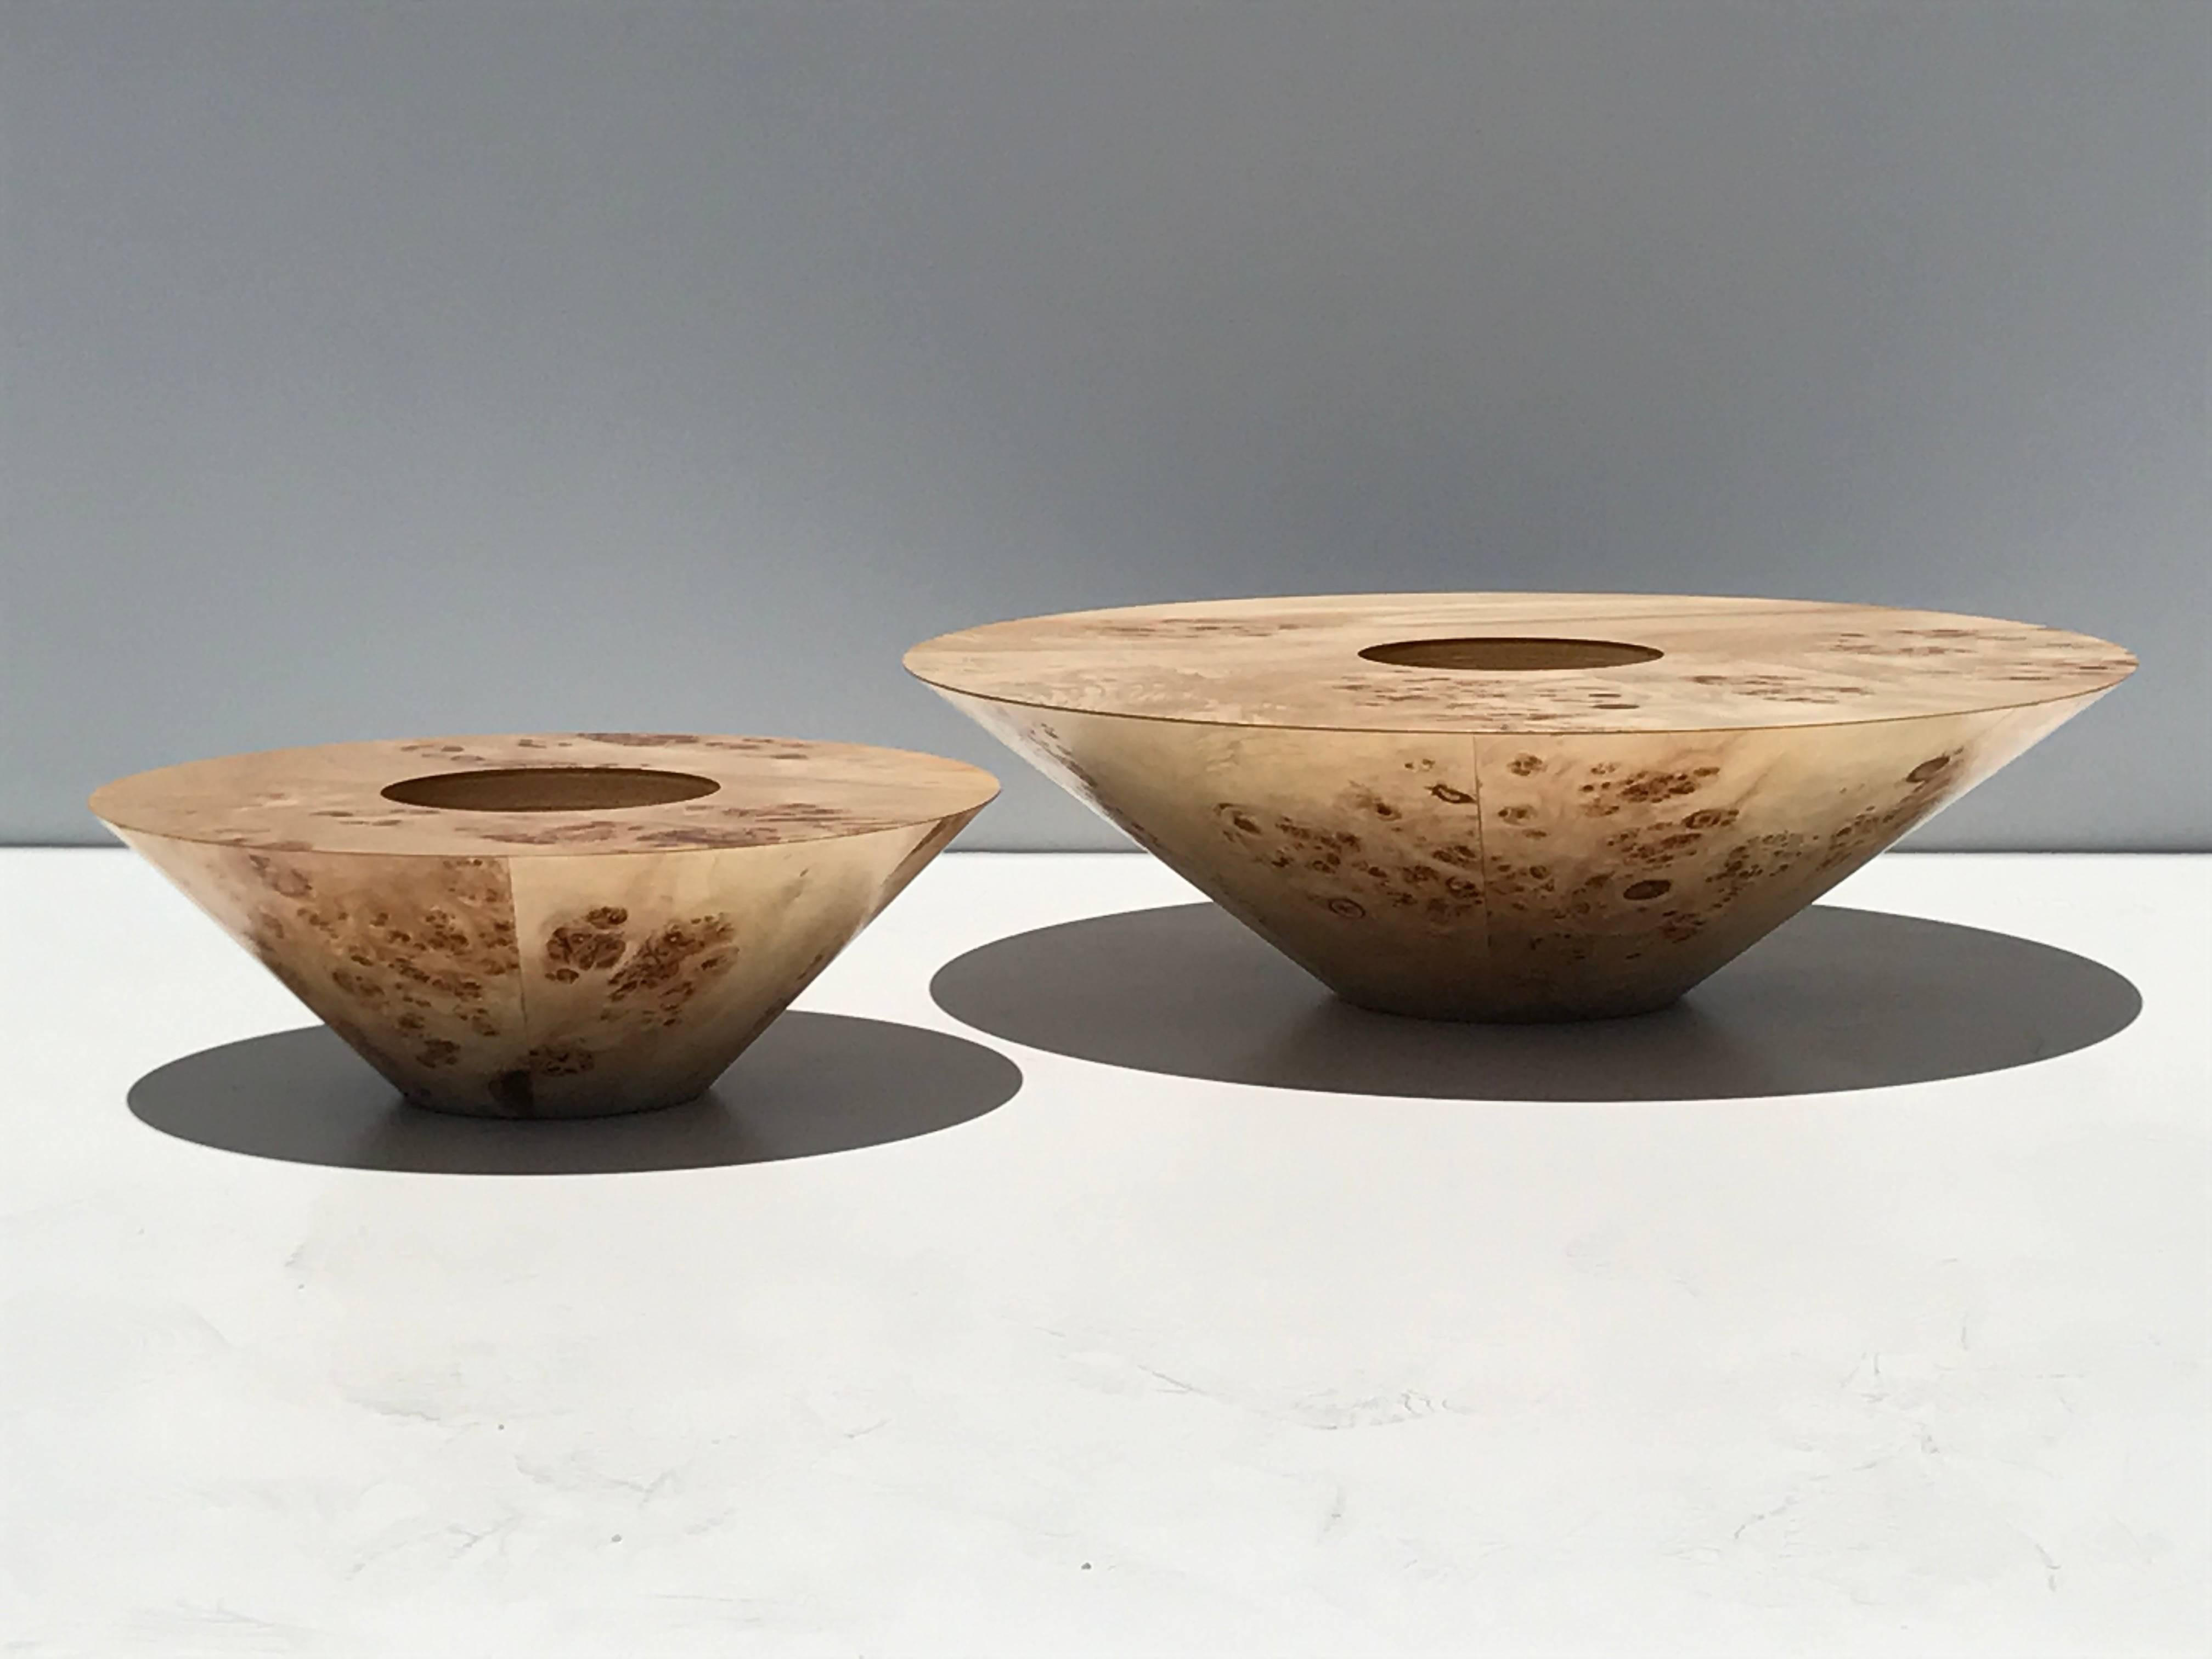 Set of two burl wood candleholders. 
Measures: Large is 18 